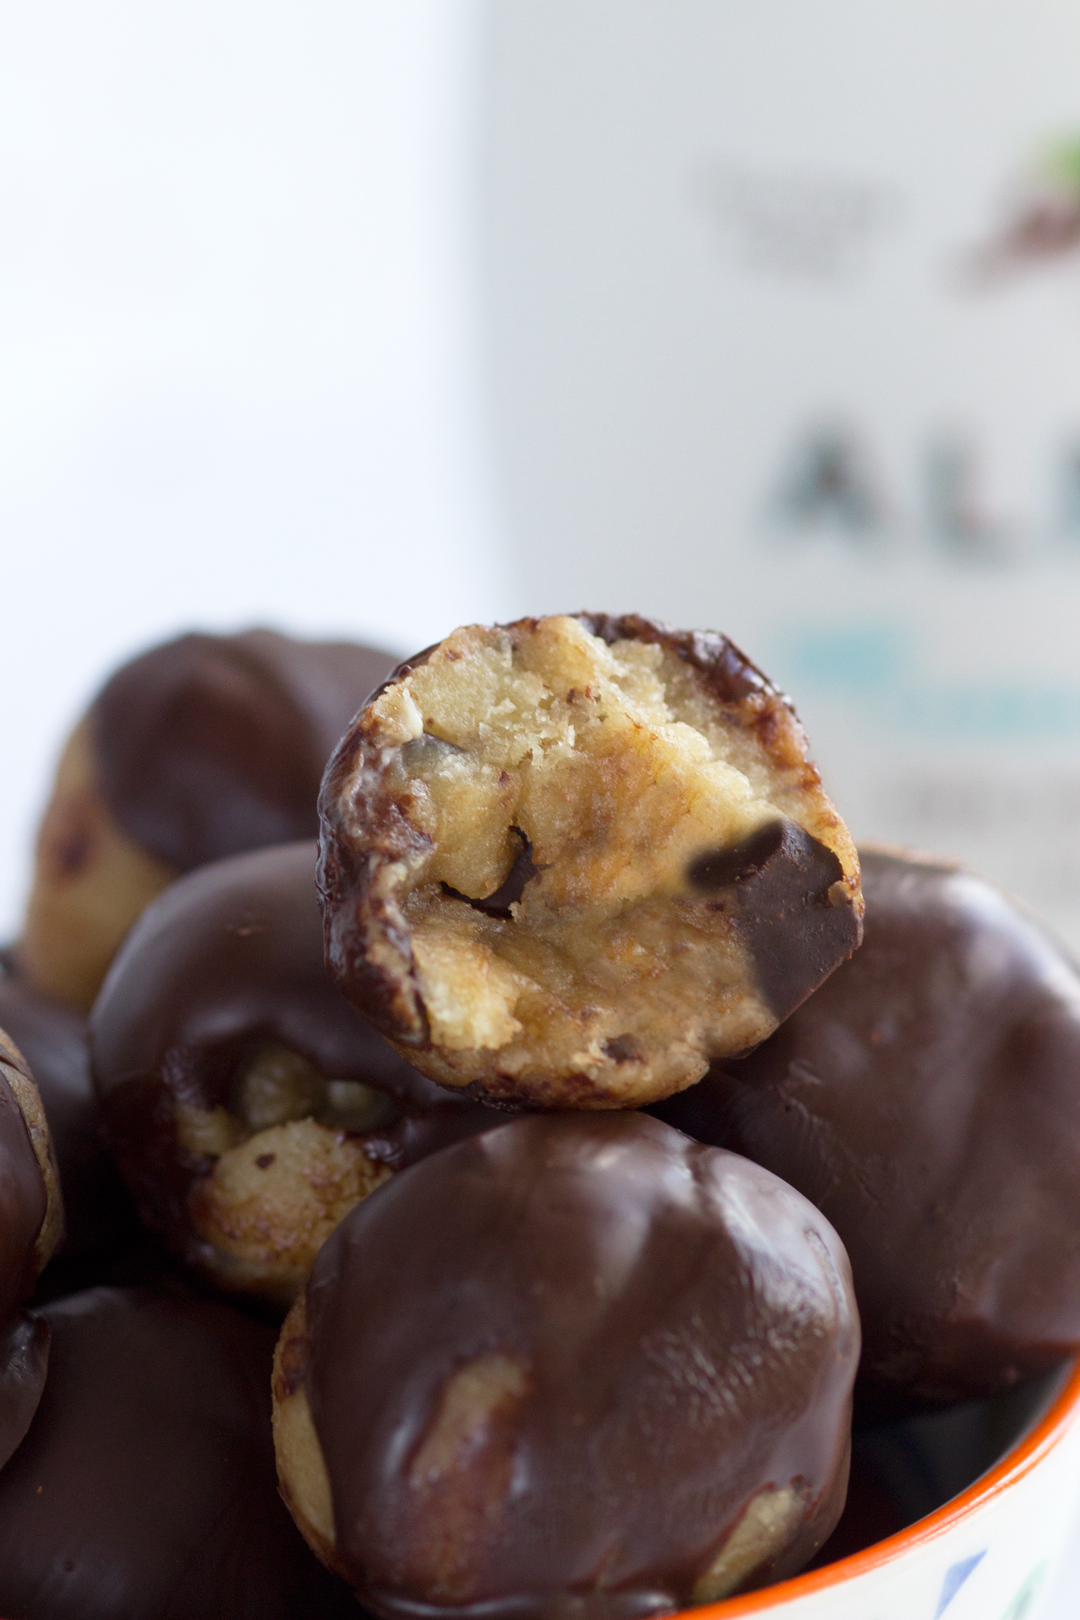 Coconut & Cookie Dough Truly Low Carb Energy Bites | Sugar free, dairy free, refined sugar free, paleo and vegan!